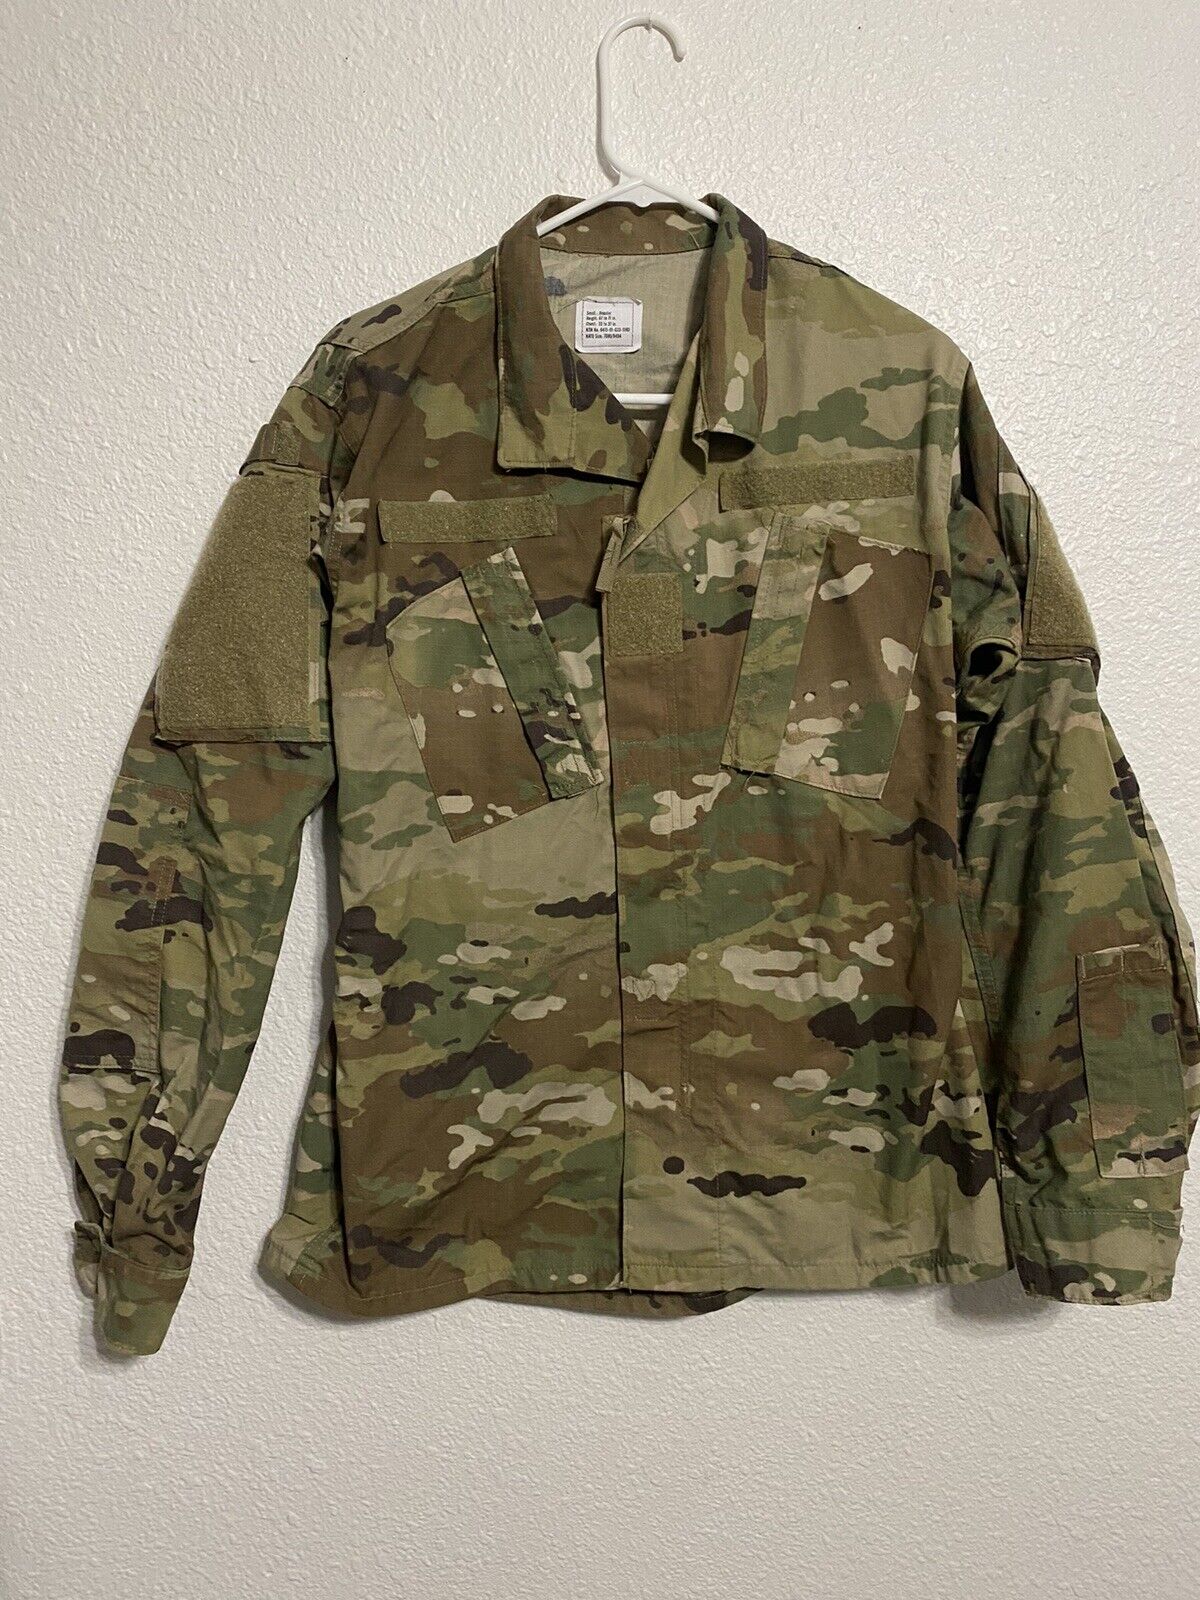 MULTICAM OCP Jacket SMALL - REGULAR  AIR FORCE / ARMY BARELY USED